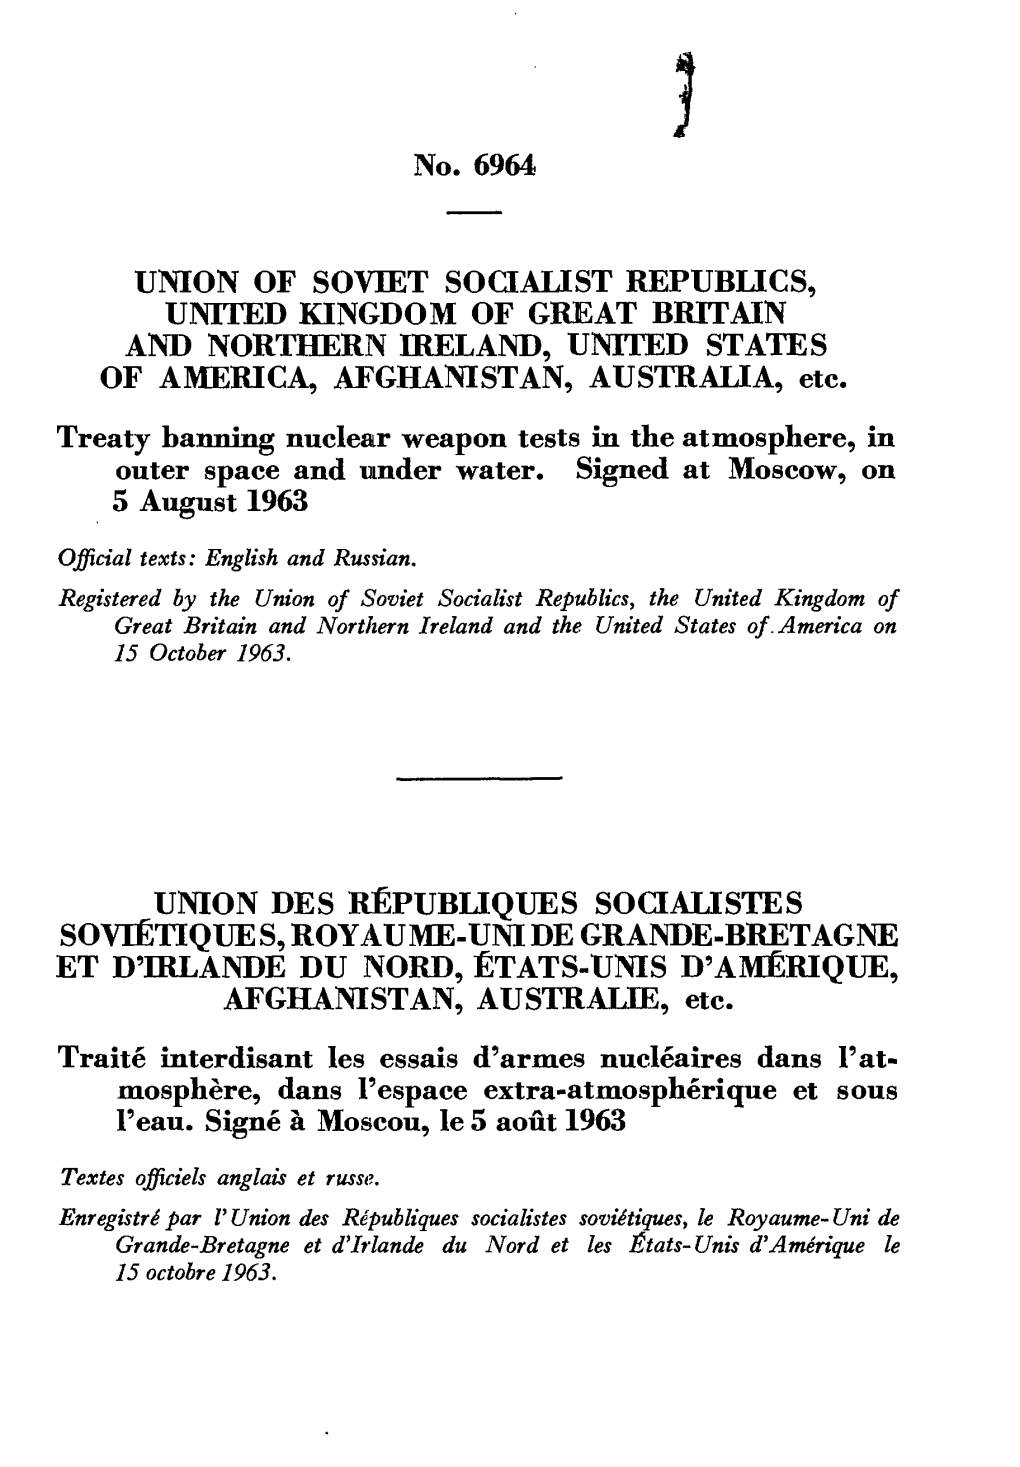 No. 6964 UNION of SOVIET SOCIALIST REPUBLICS, UNITED KINGDOM of GREAT BRITAIN and NORTHERN IRELAND, UNITED STATES of AMERICA, AF